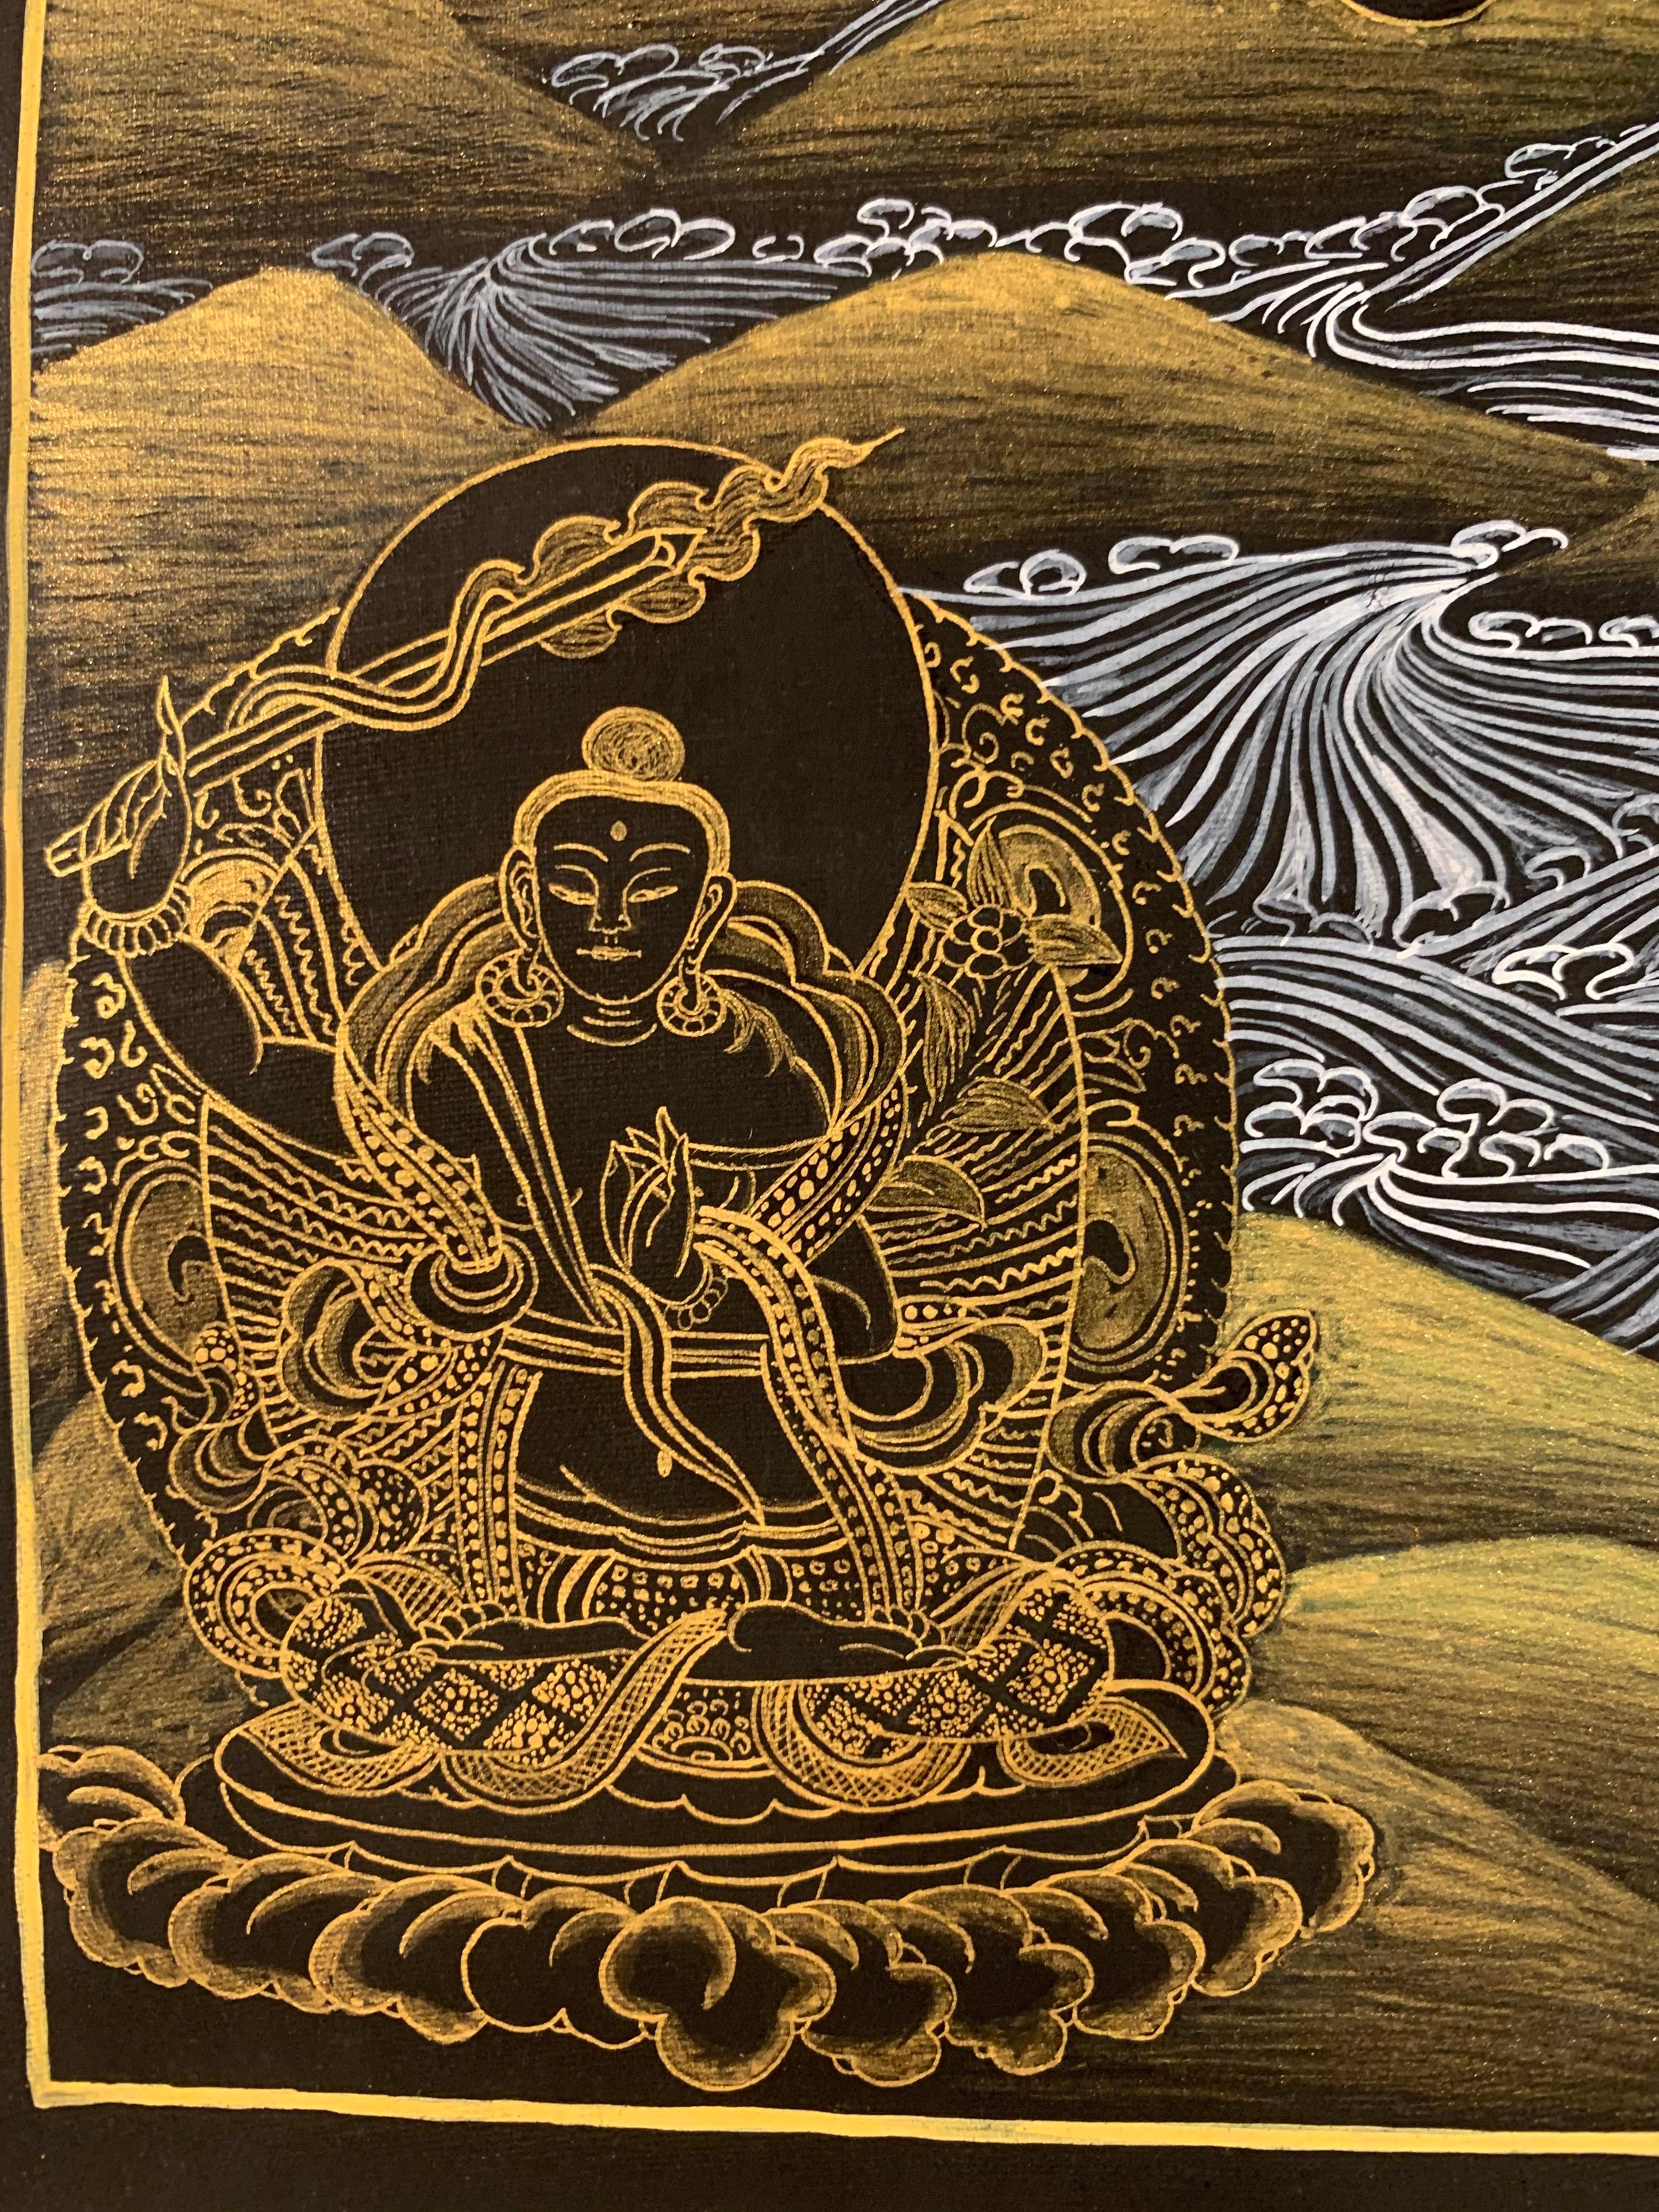 Unframed hand painted Chenrezig thangka on canvas with 24 carat real gold. Gold strokes on black background makes this thangka a desirable piece of art.
Chenrezig is the Buddha of Compassion. It is believed that Chenrezig is the embodiment of